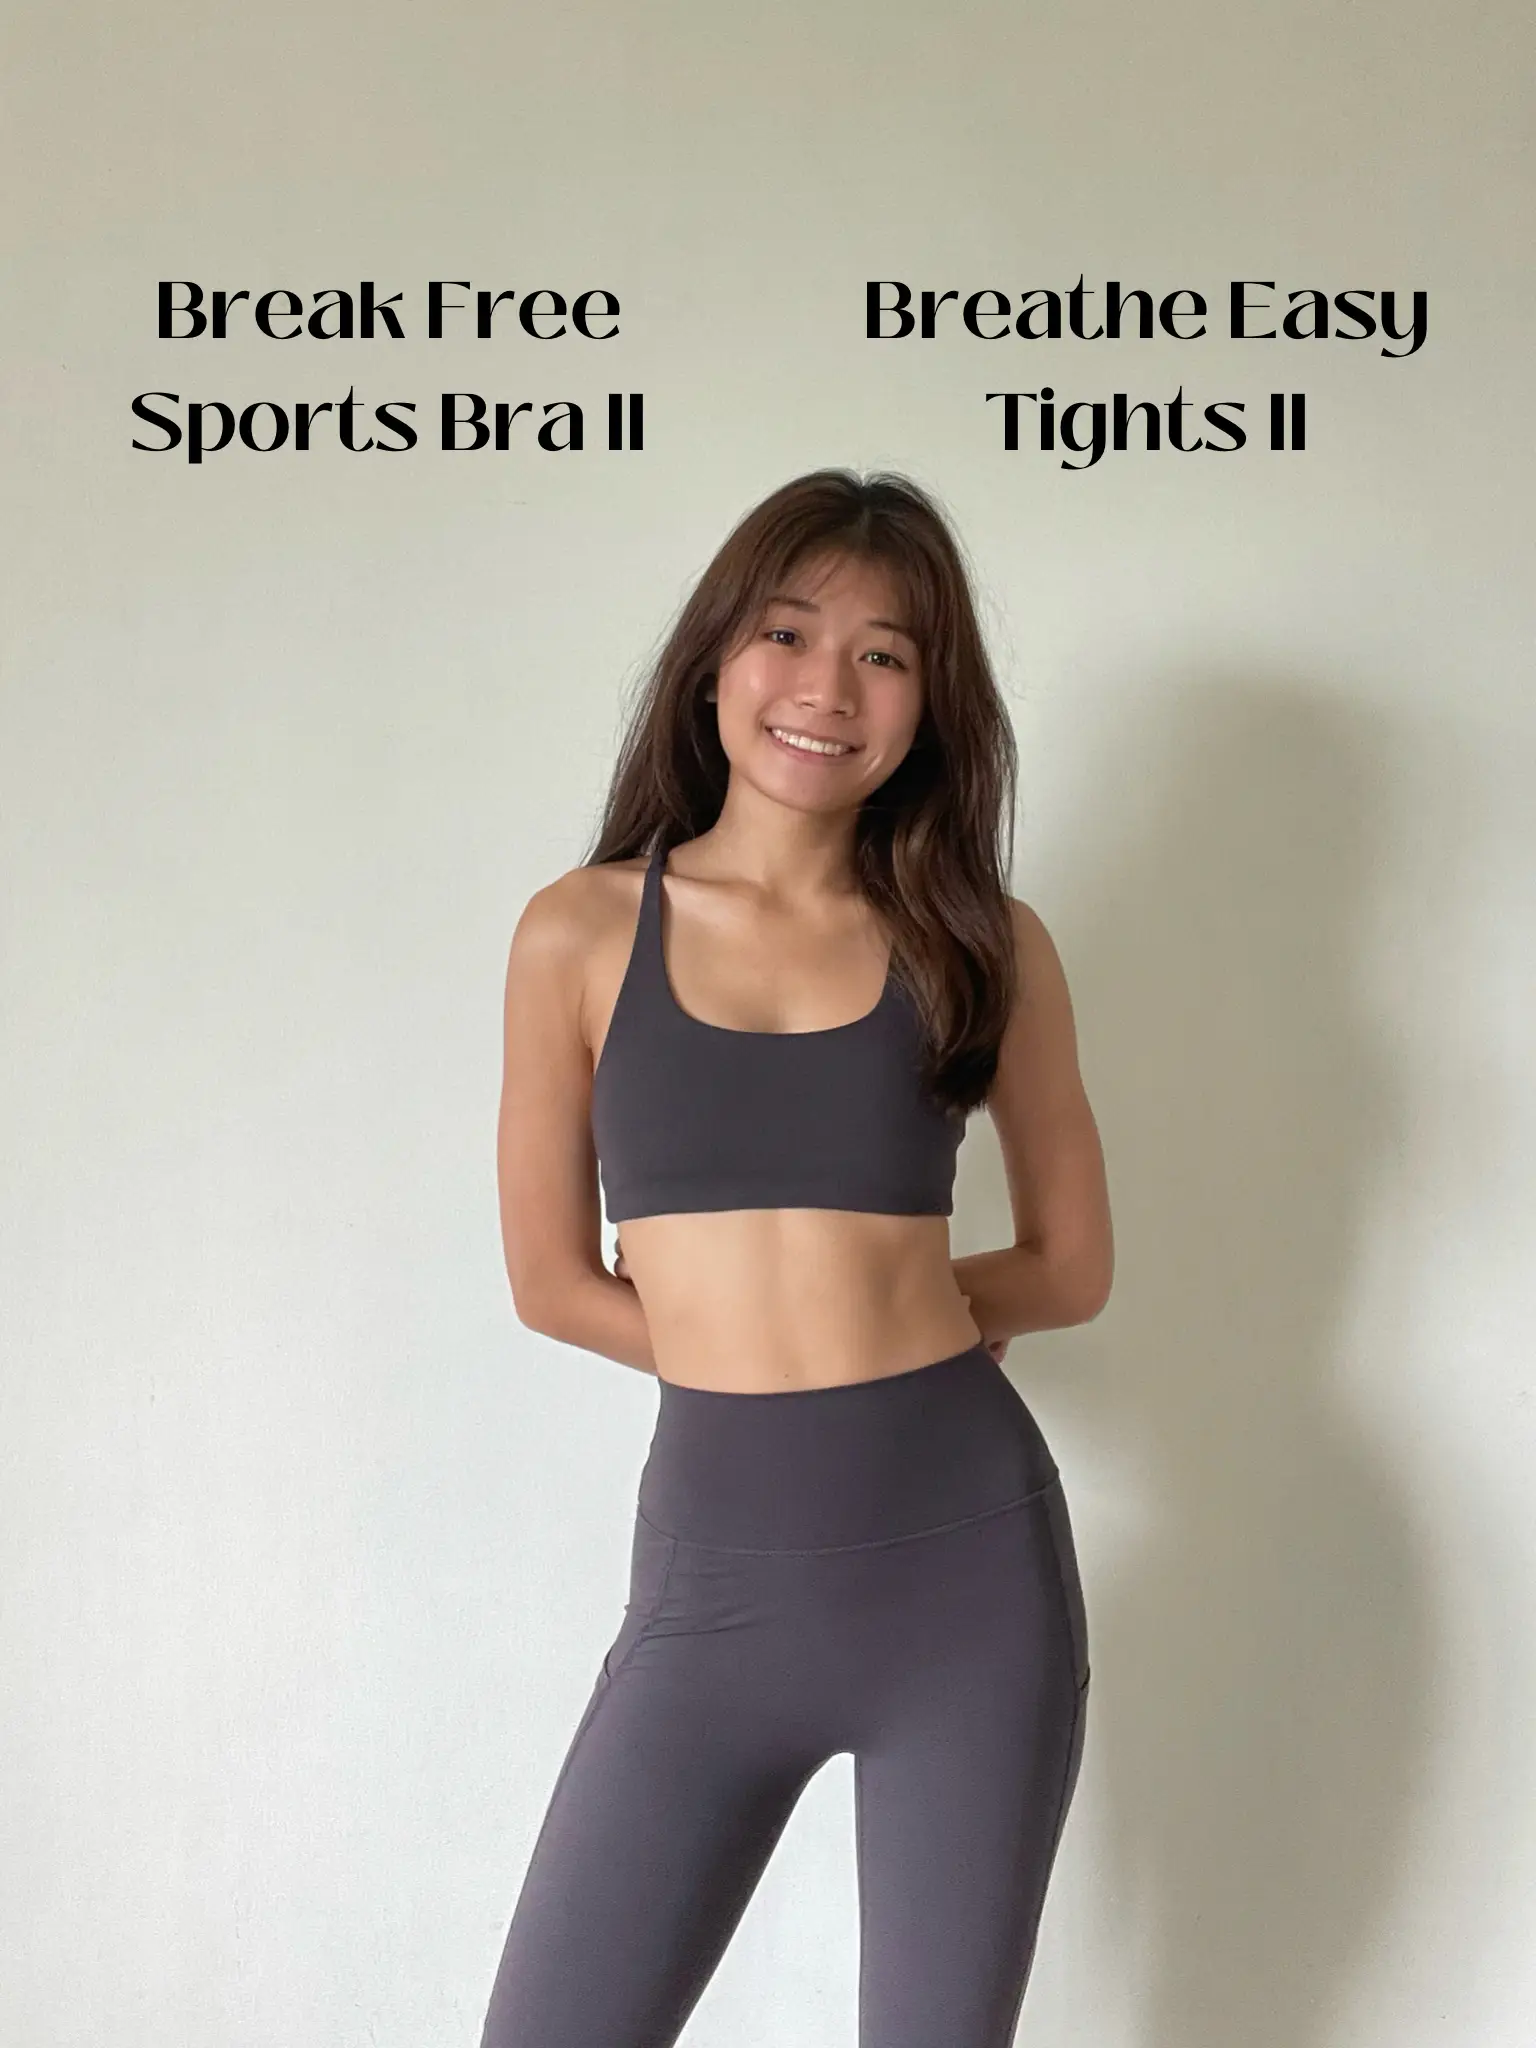 The comfiest and prettiest activewear 💖, Gallery posted by julia ☁️